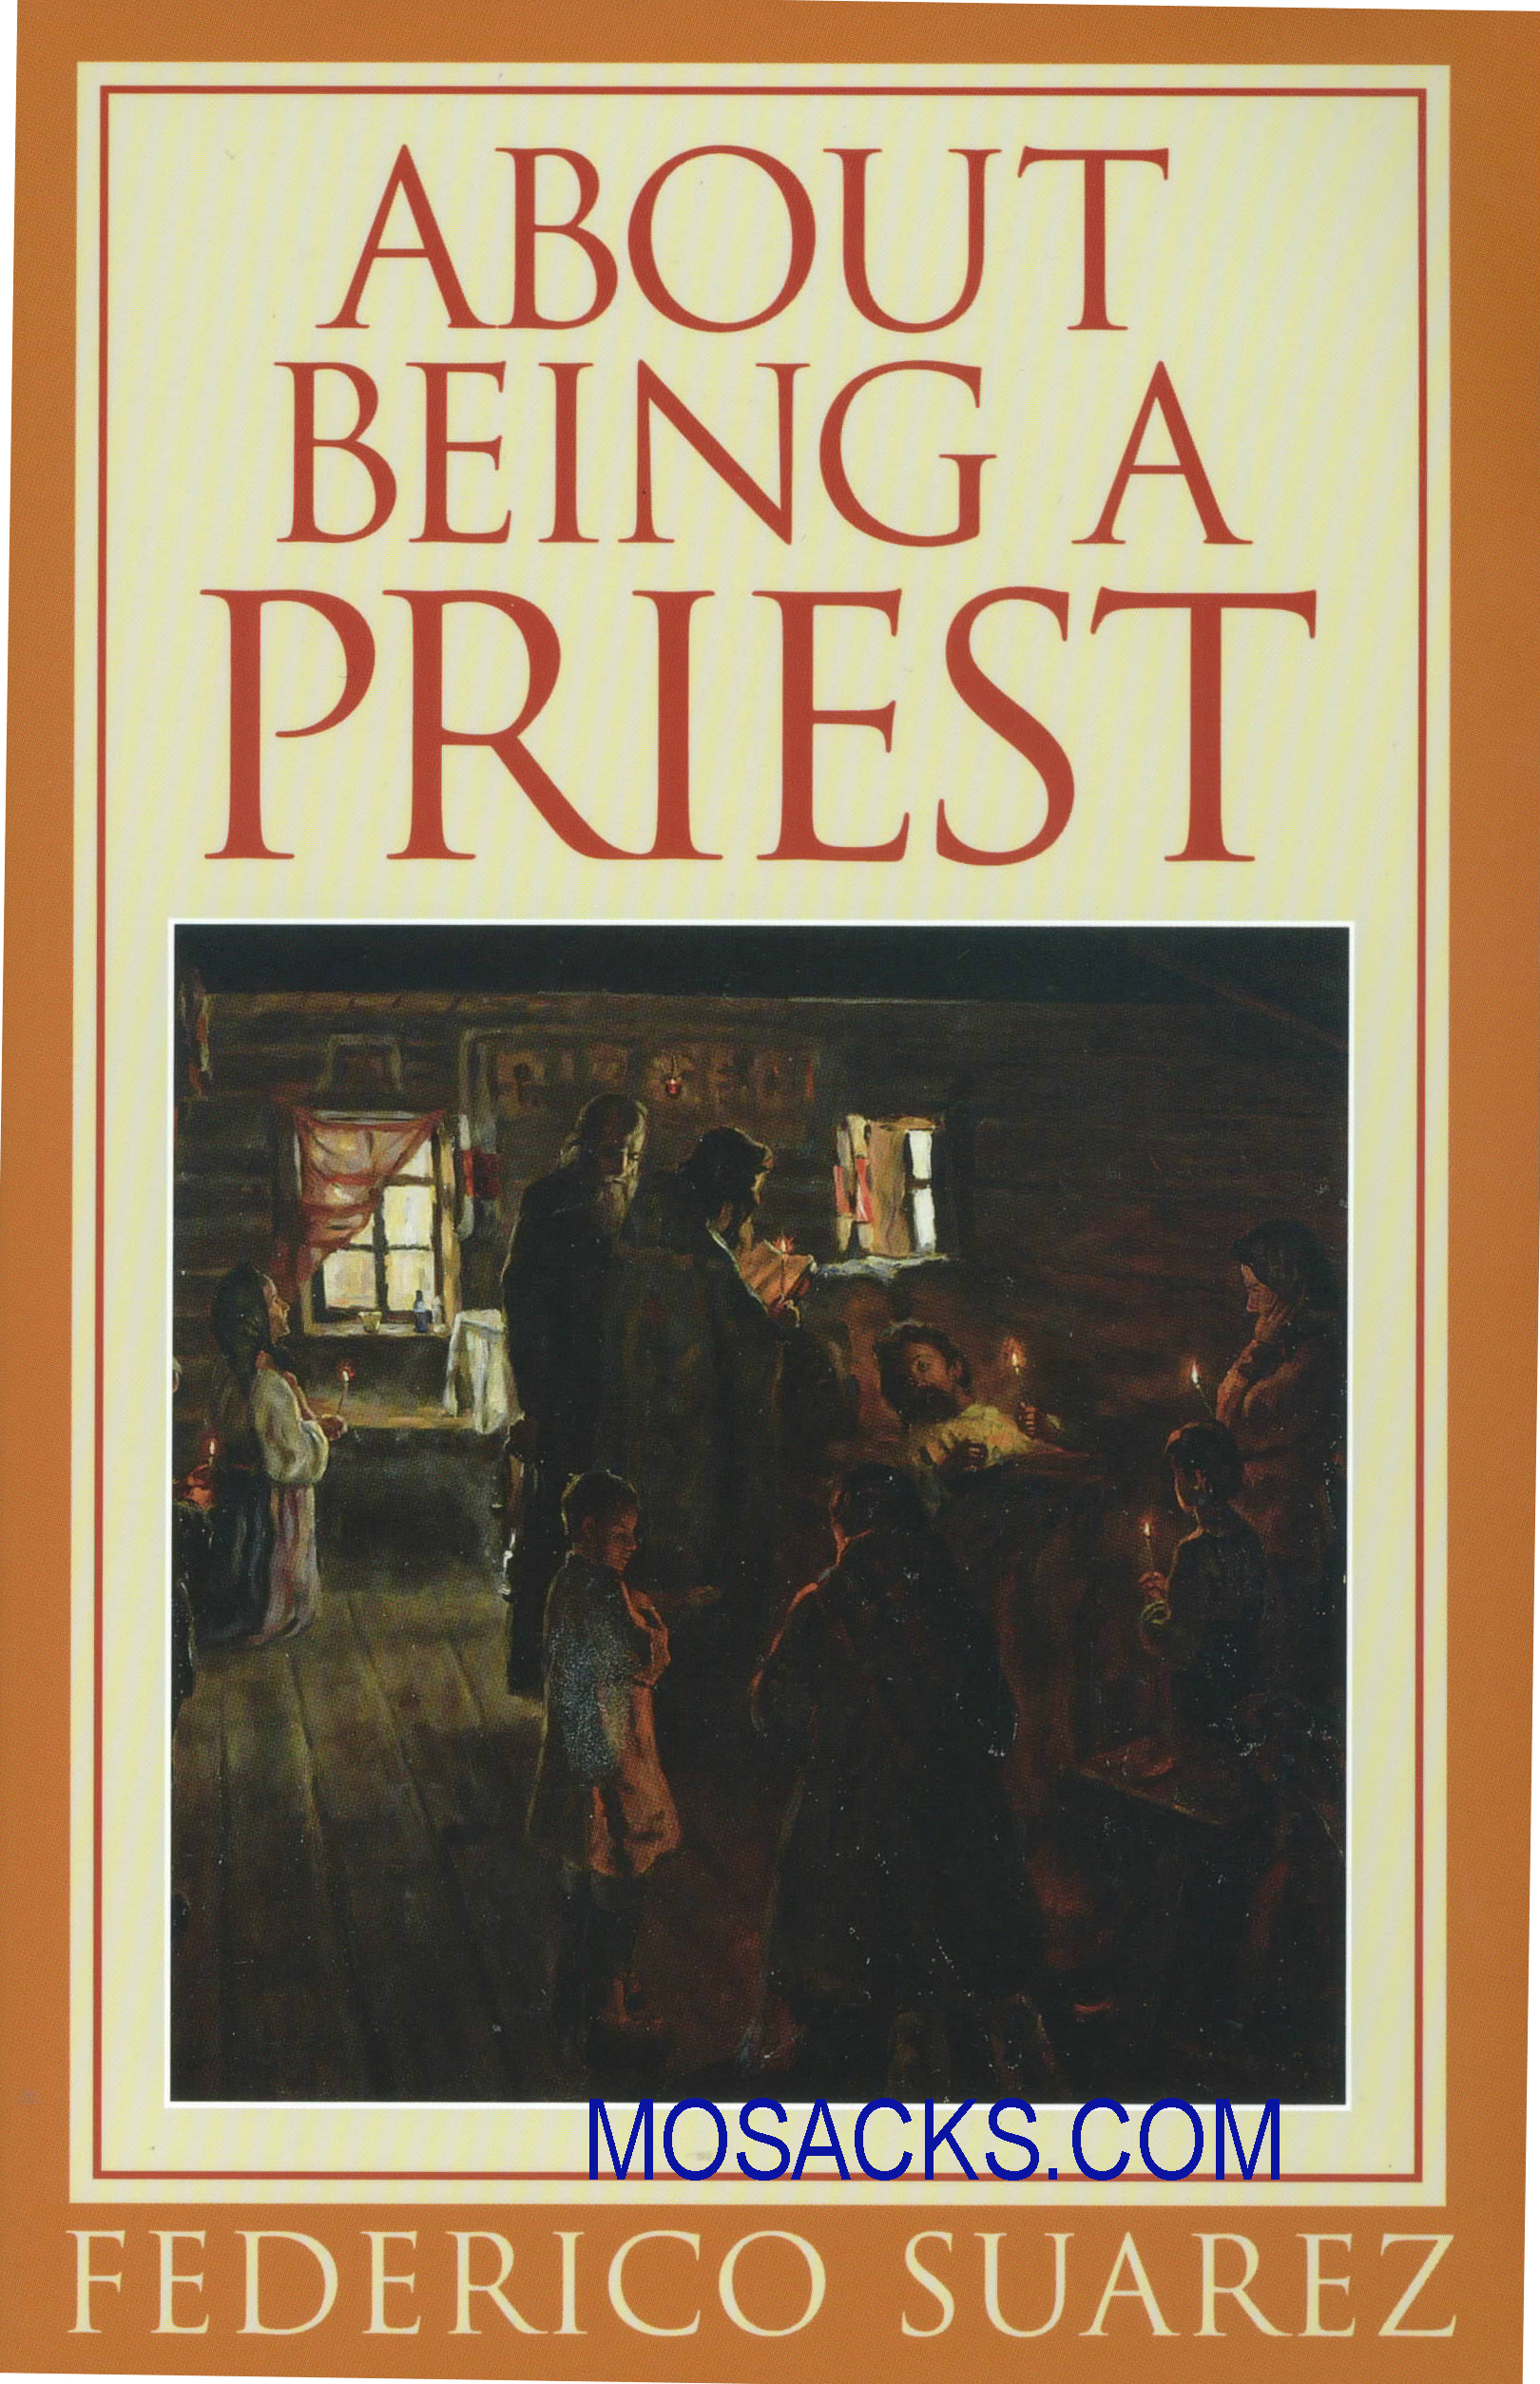 About Being A Priest by Federico Suarez 445-3288X